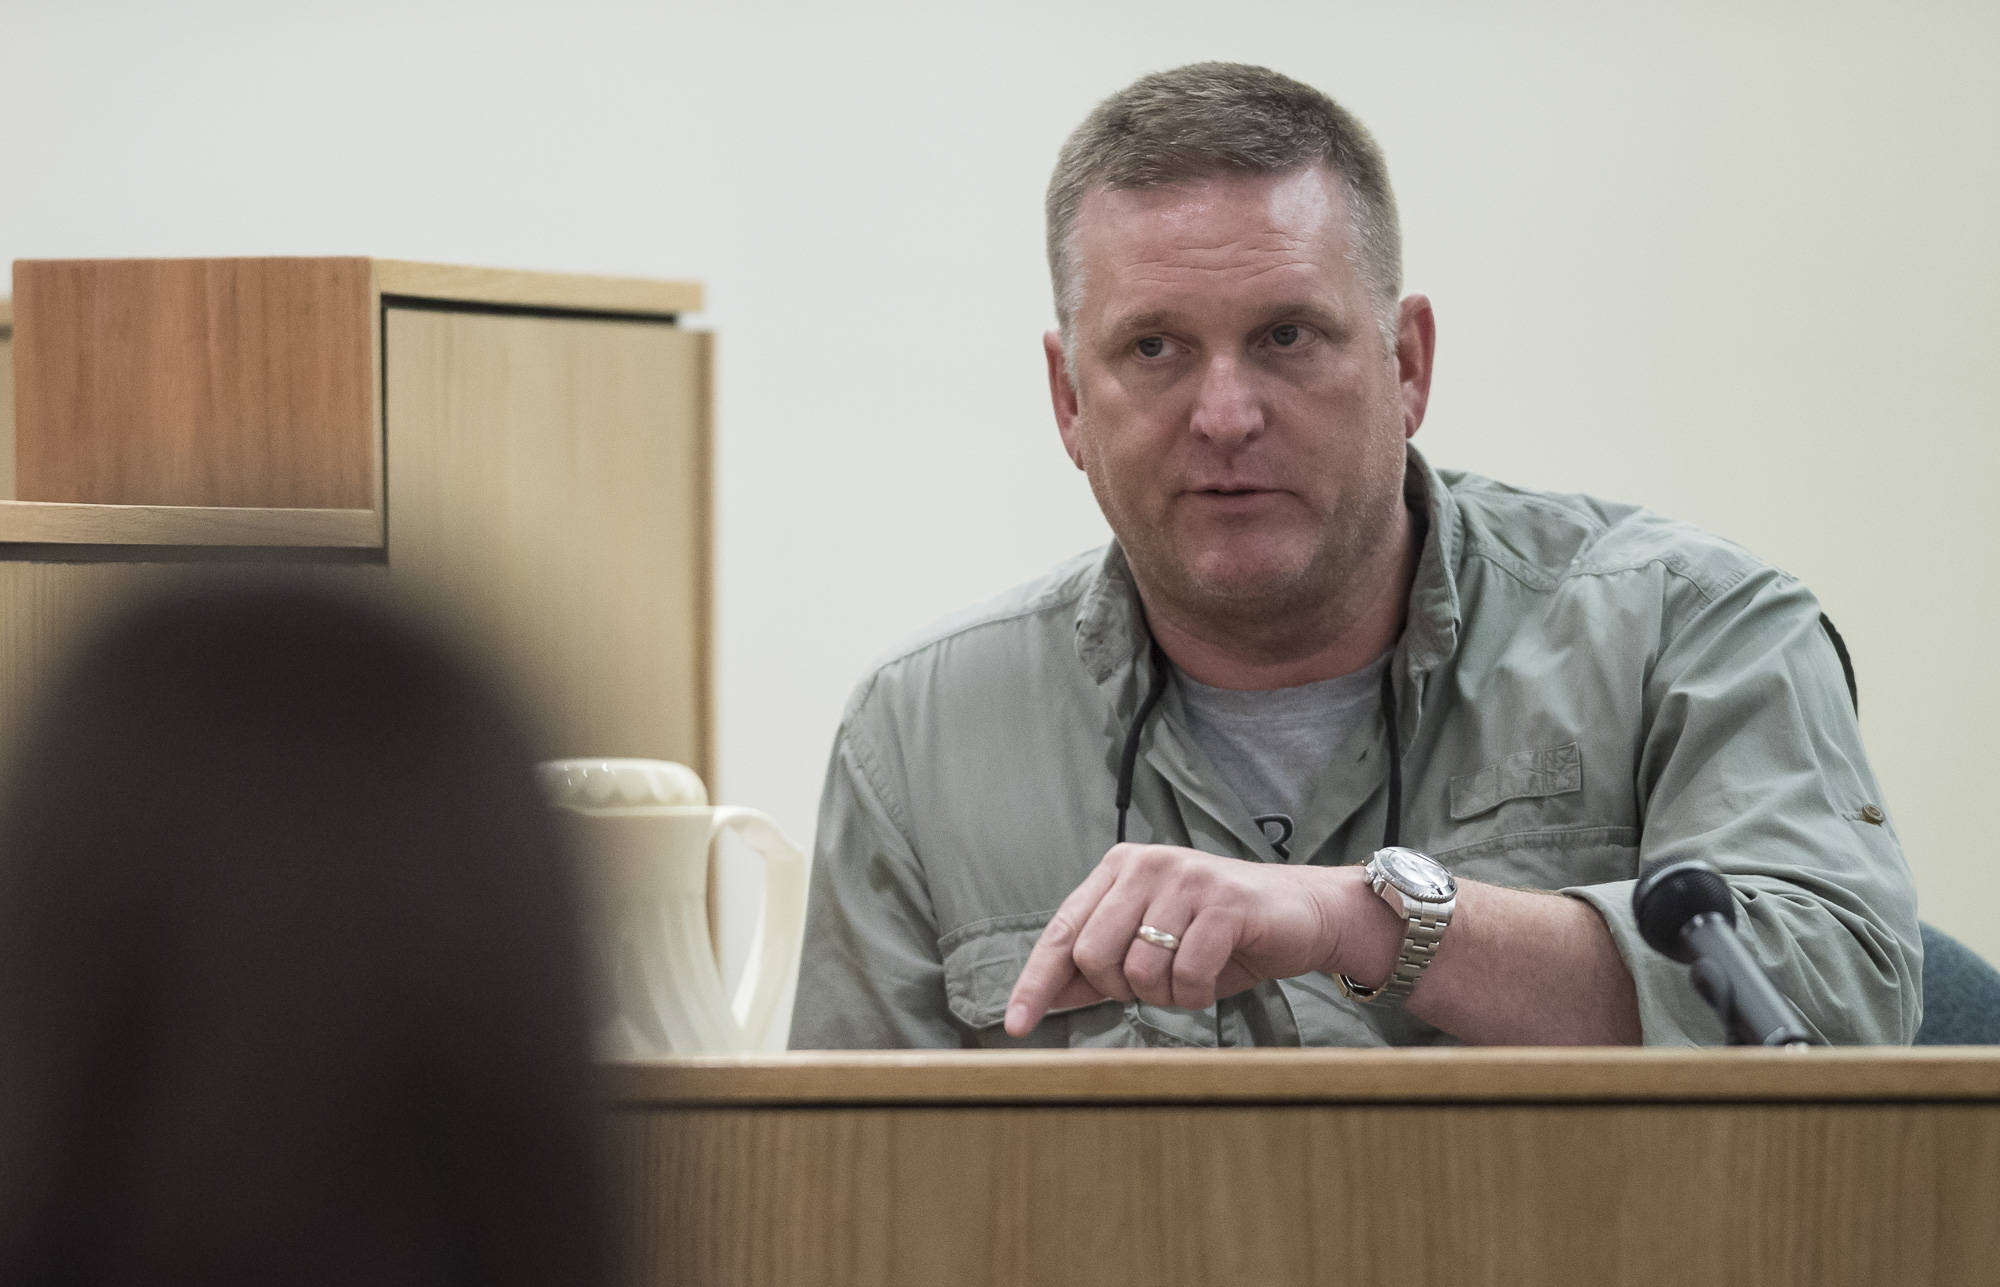 Vince Bengston, a member of a 2016 hunting party, testifies in the trial of Mark De Simone in Juneau Superior Court on Wednesday, May 2, 2018. De Simone is accused of killing Duilio Antonio “Tony” Rosales during a hunting trip in Excursion Inlet in 2016. (Michael Penn | Juneau Empire)